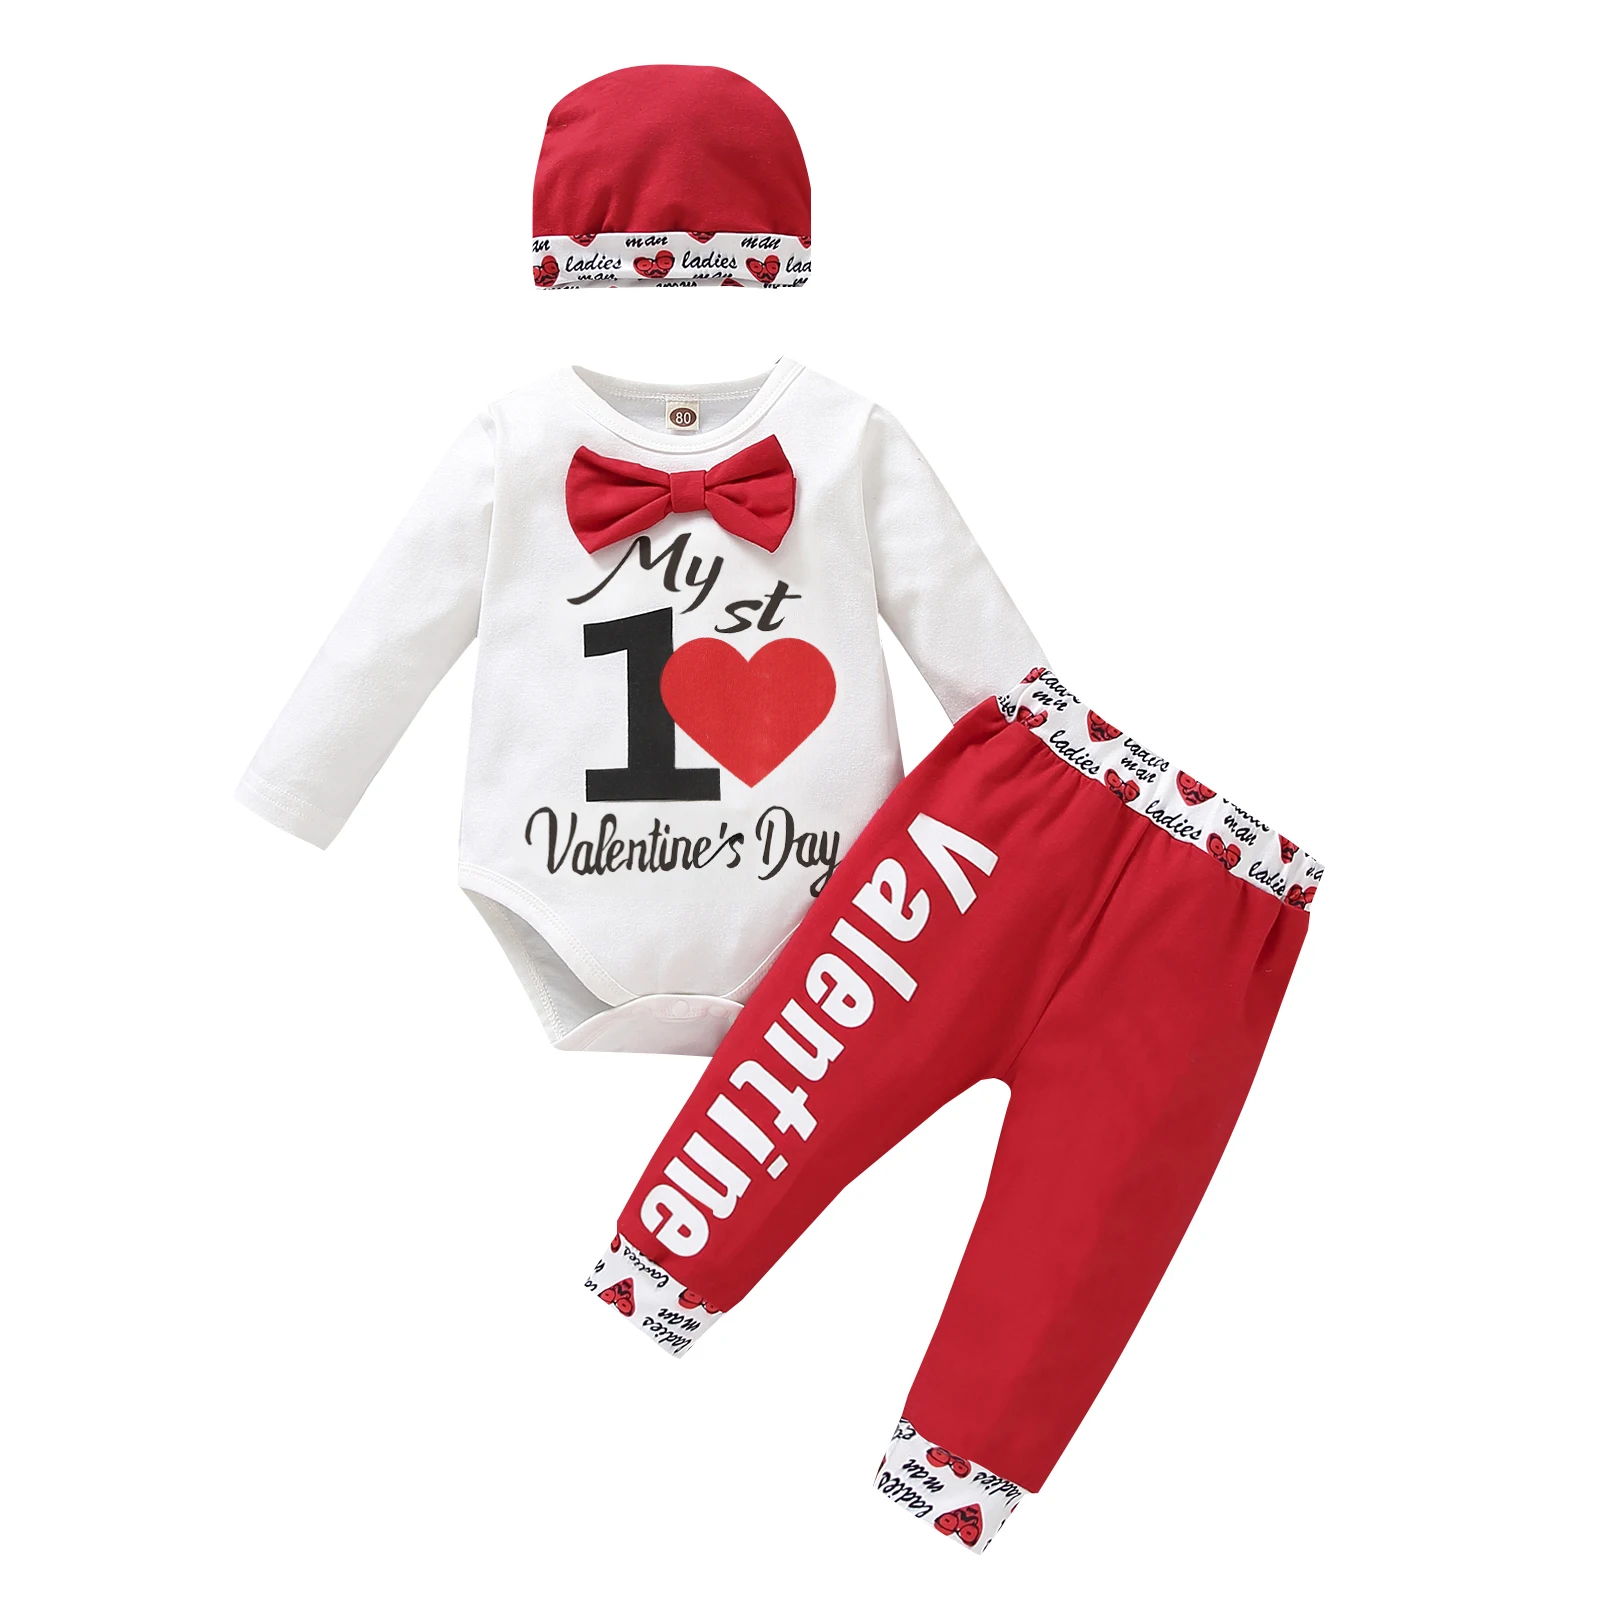 

3Pcs Baby Valentines Outfits Letter Print Long Sleeves Romper + Heart Print Pants + Hat Set for Infant Boys Girls 0-12 Months